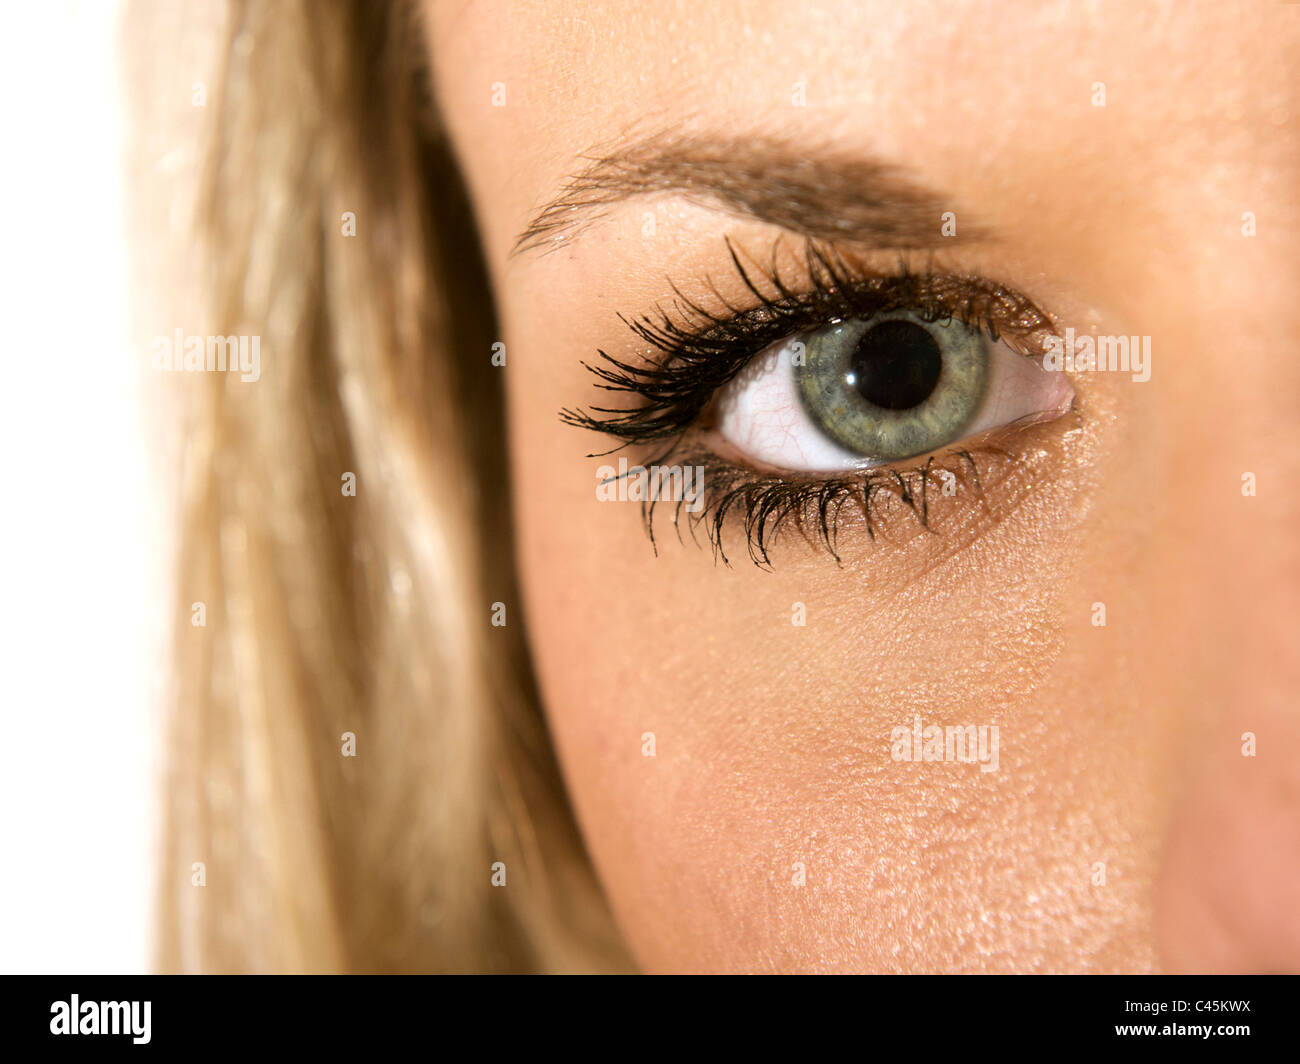 Close up of a woman's eye. Stock Photo